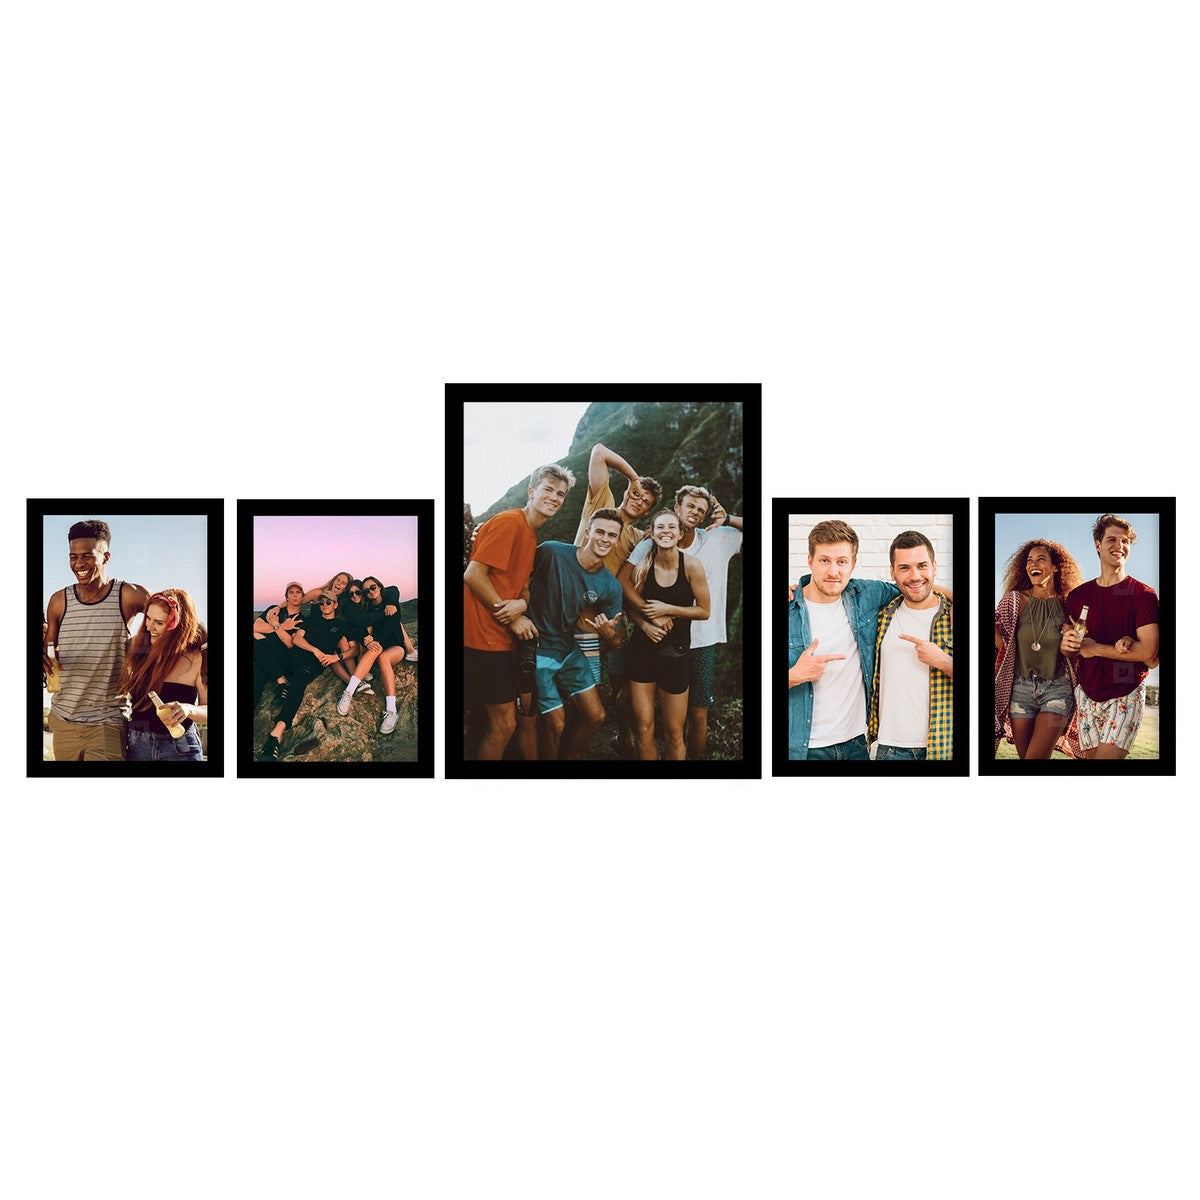 Memory Wall Collage Photo Frame - Set of 5 Photo Frames for 4 Photos of 5"x7", 1 Photos of 8"x10"